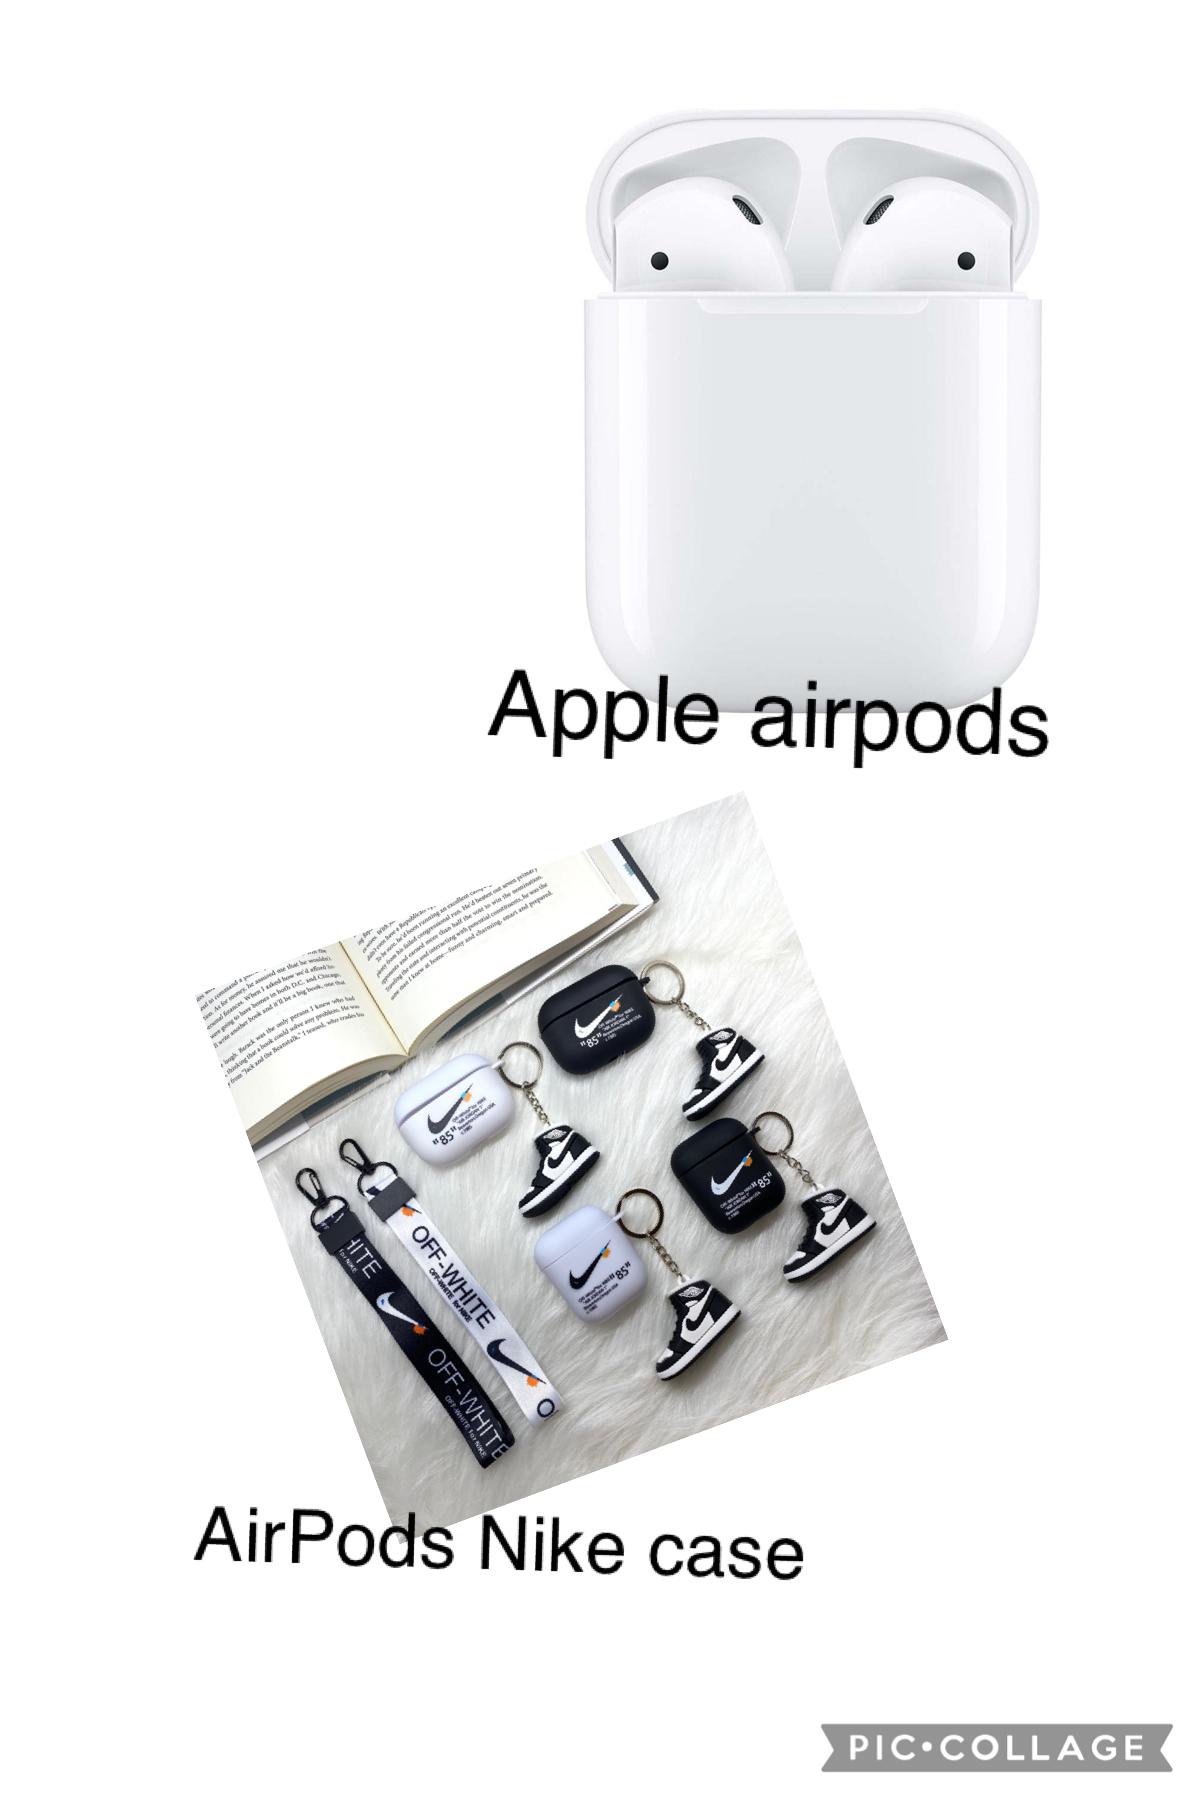 New AirPods with cute case